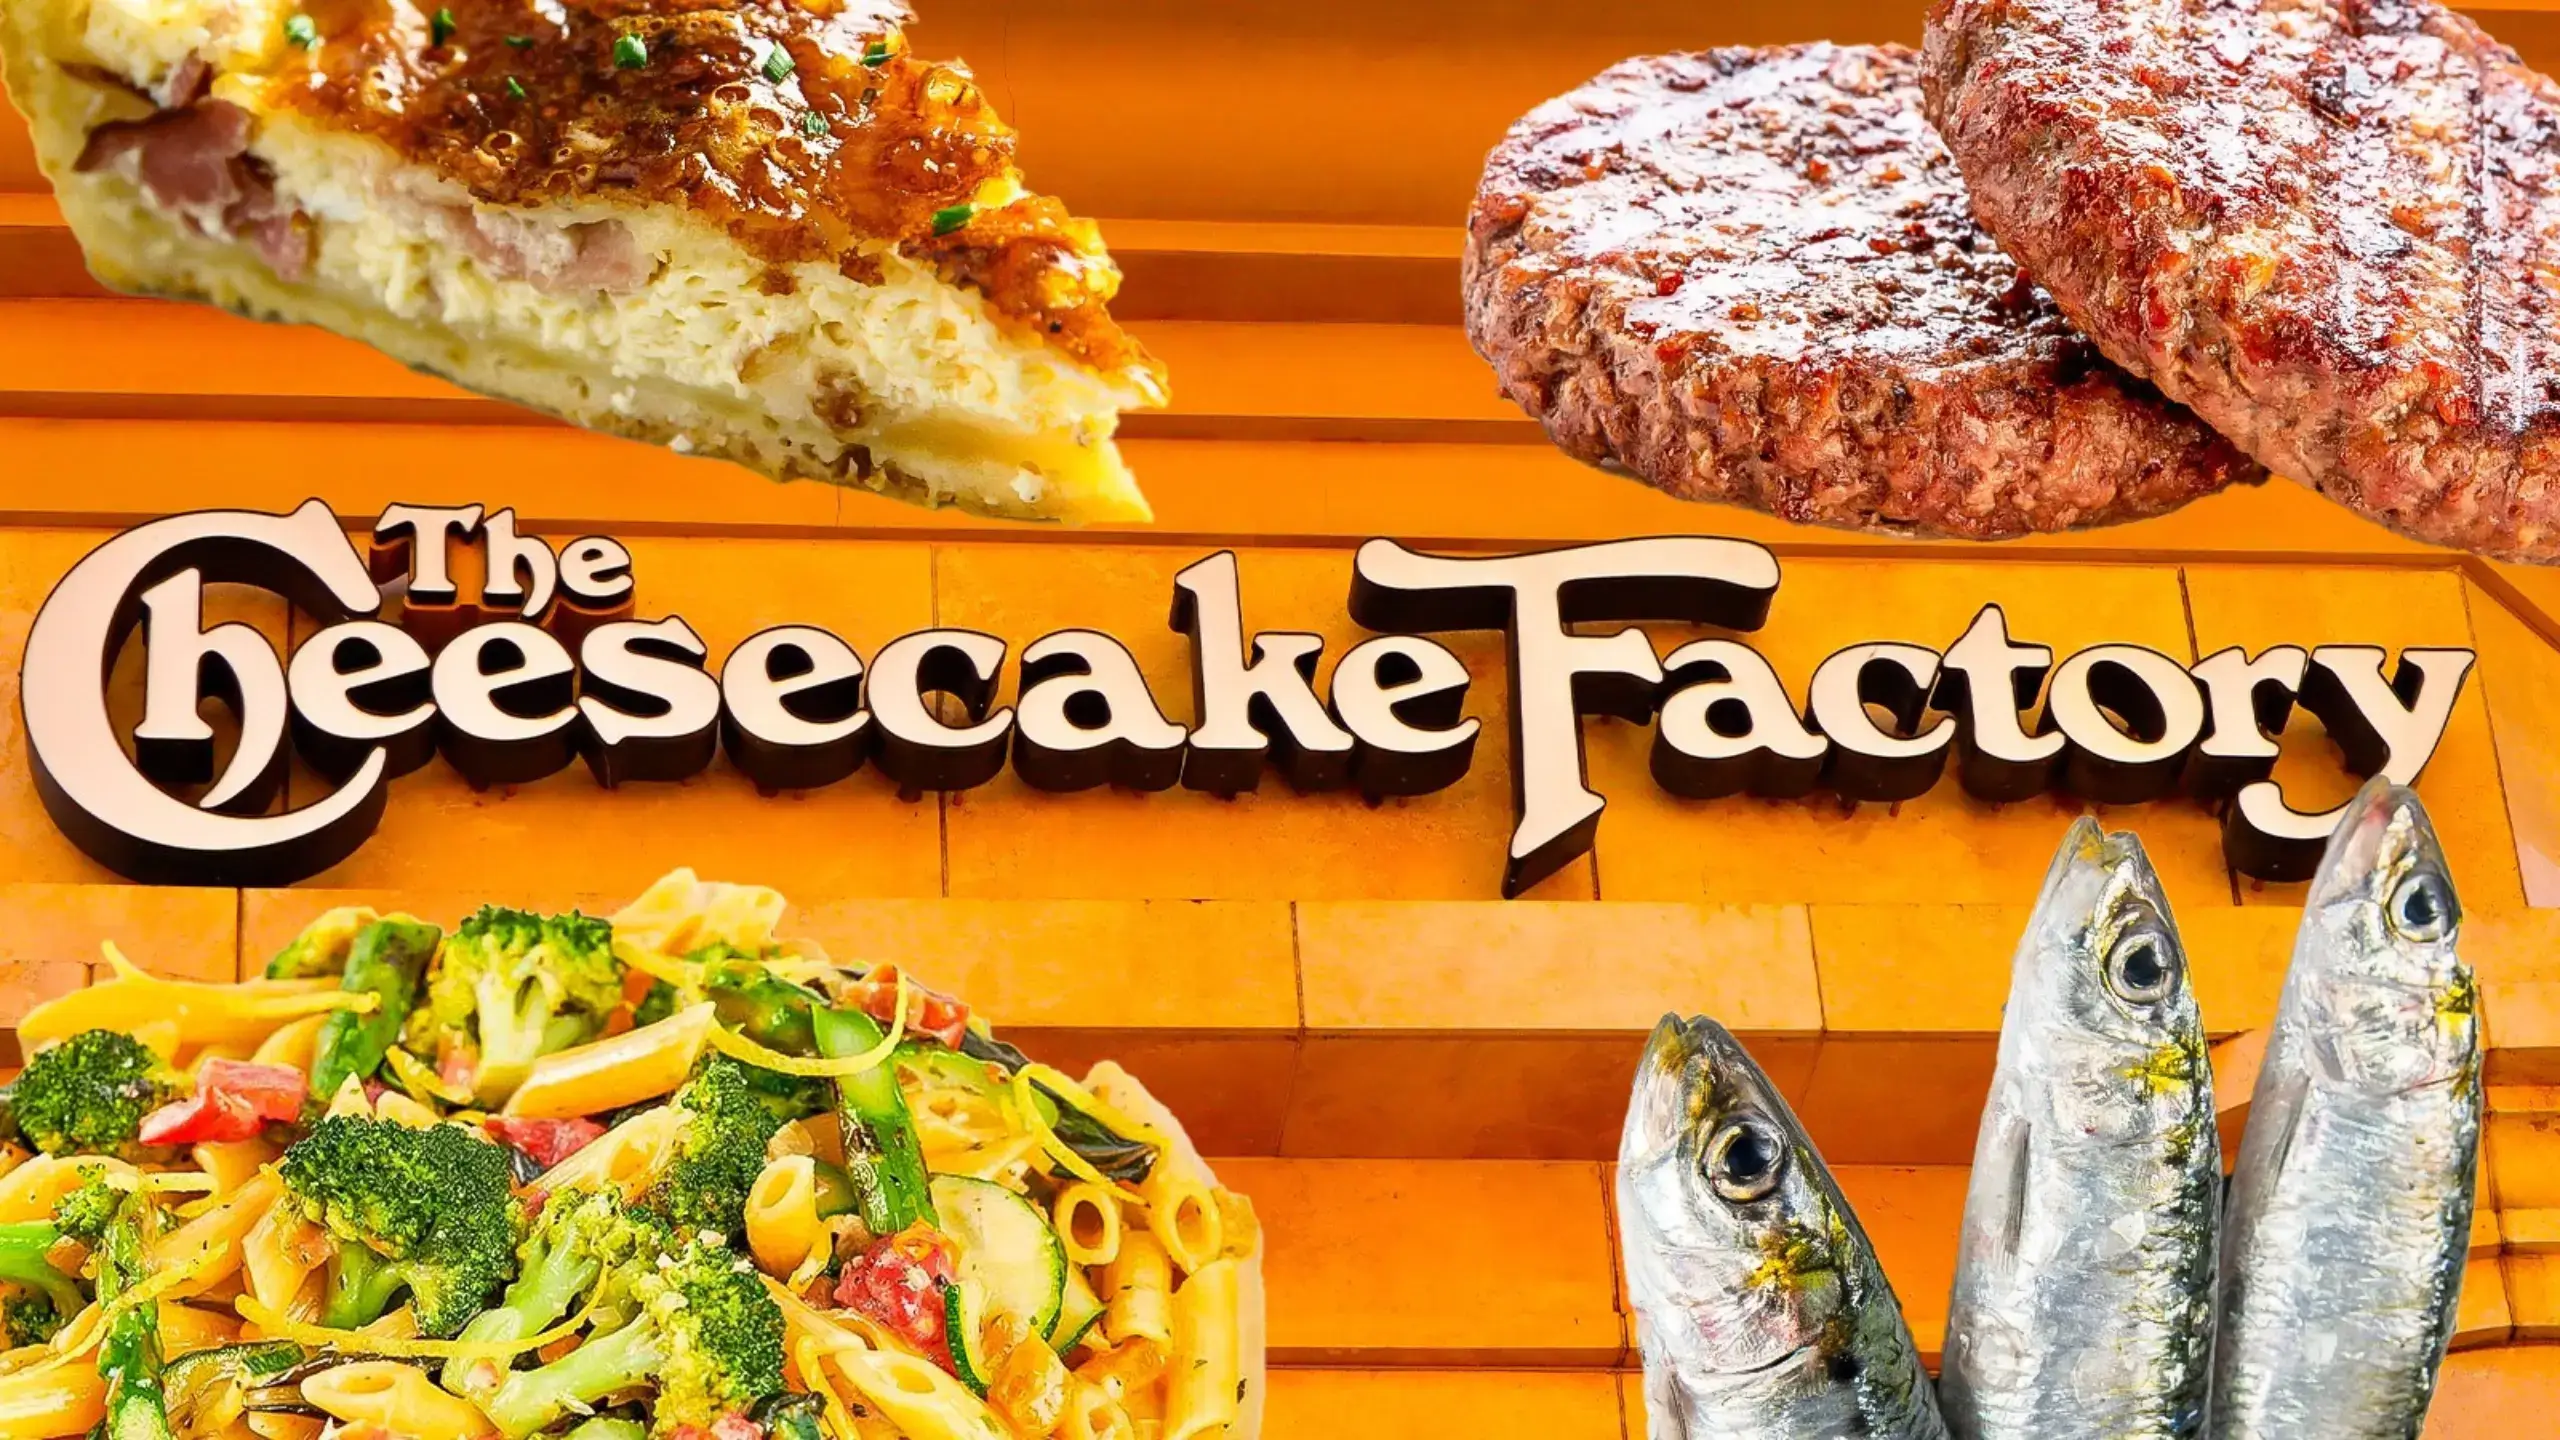 Are Searching For Cheesecake Factory Near You | Then Read This Comprehensive Guide To Find Cheesecake Factory Near Me Locations And Hours.